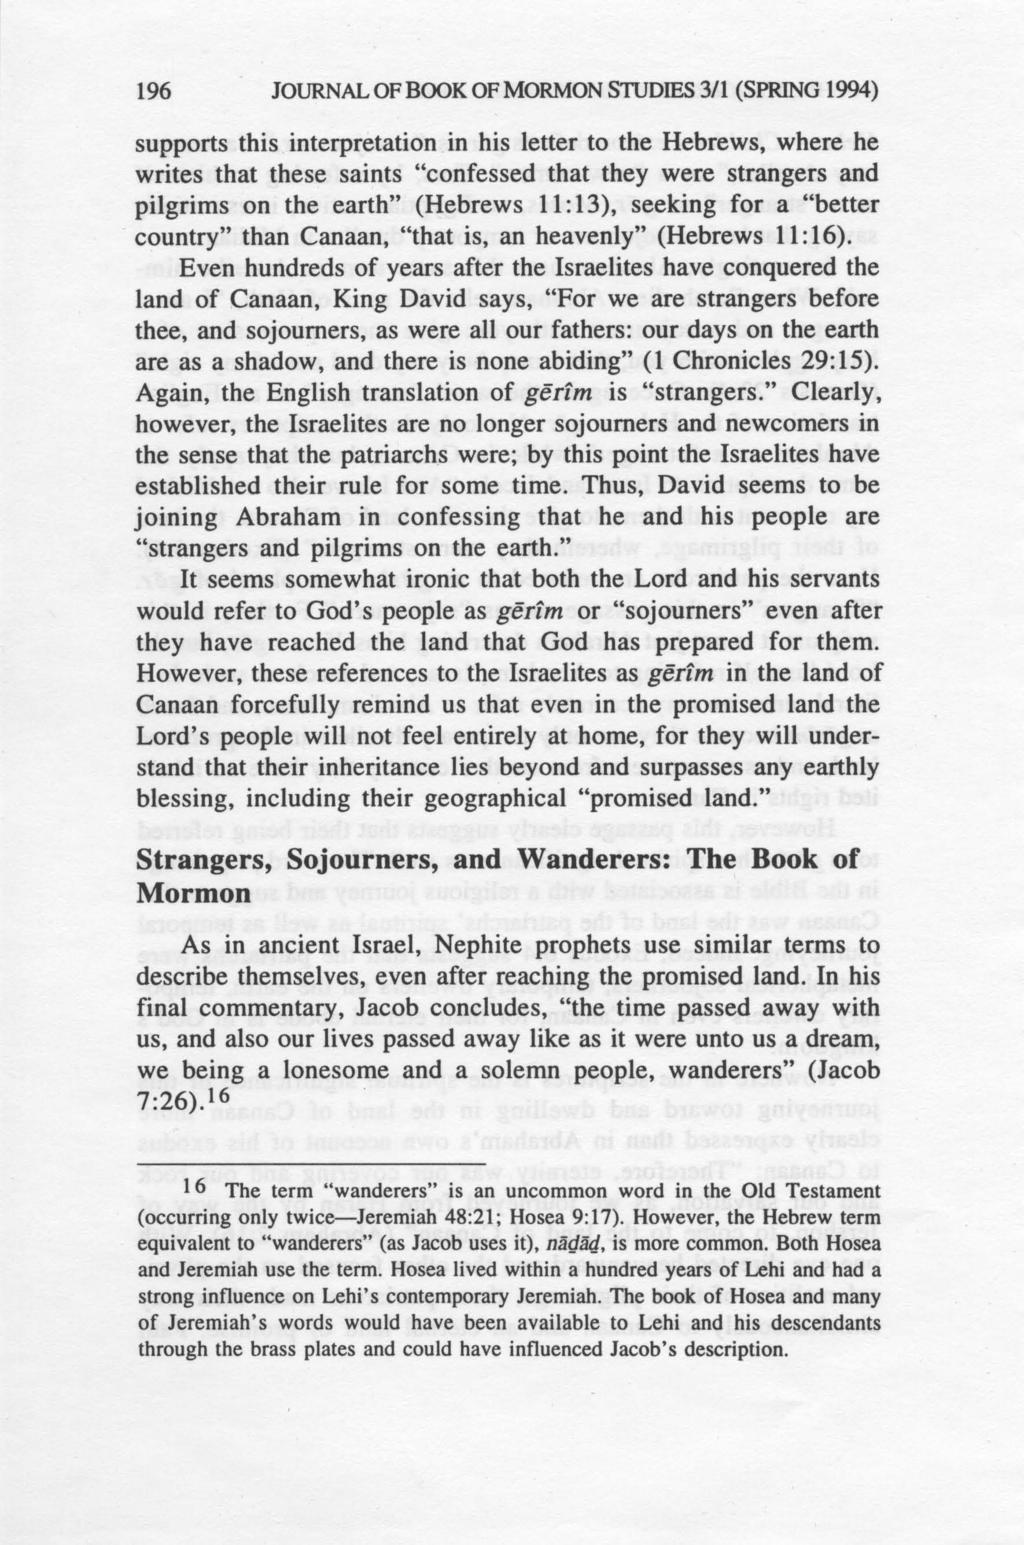 196 JOURNAL OF BOOK OF MORMON STUDIES 3/1 (SPRING 1994) supports this interpretation in his letter to the Hebrews, where he writes that these saints "confessed that they were strangers and pilgrims